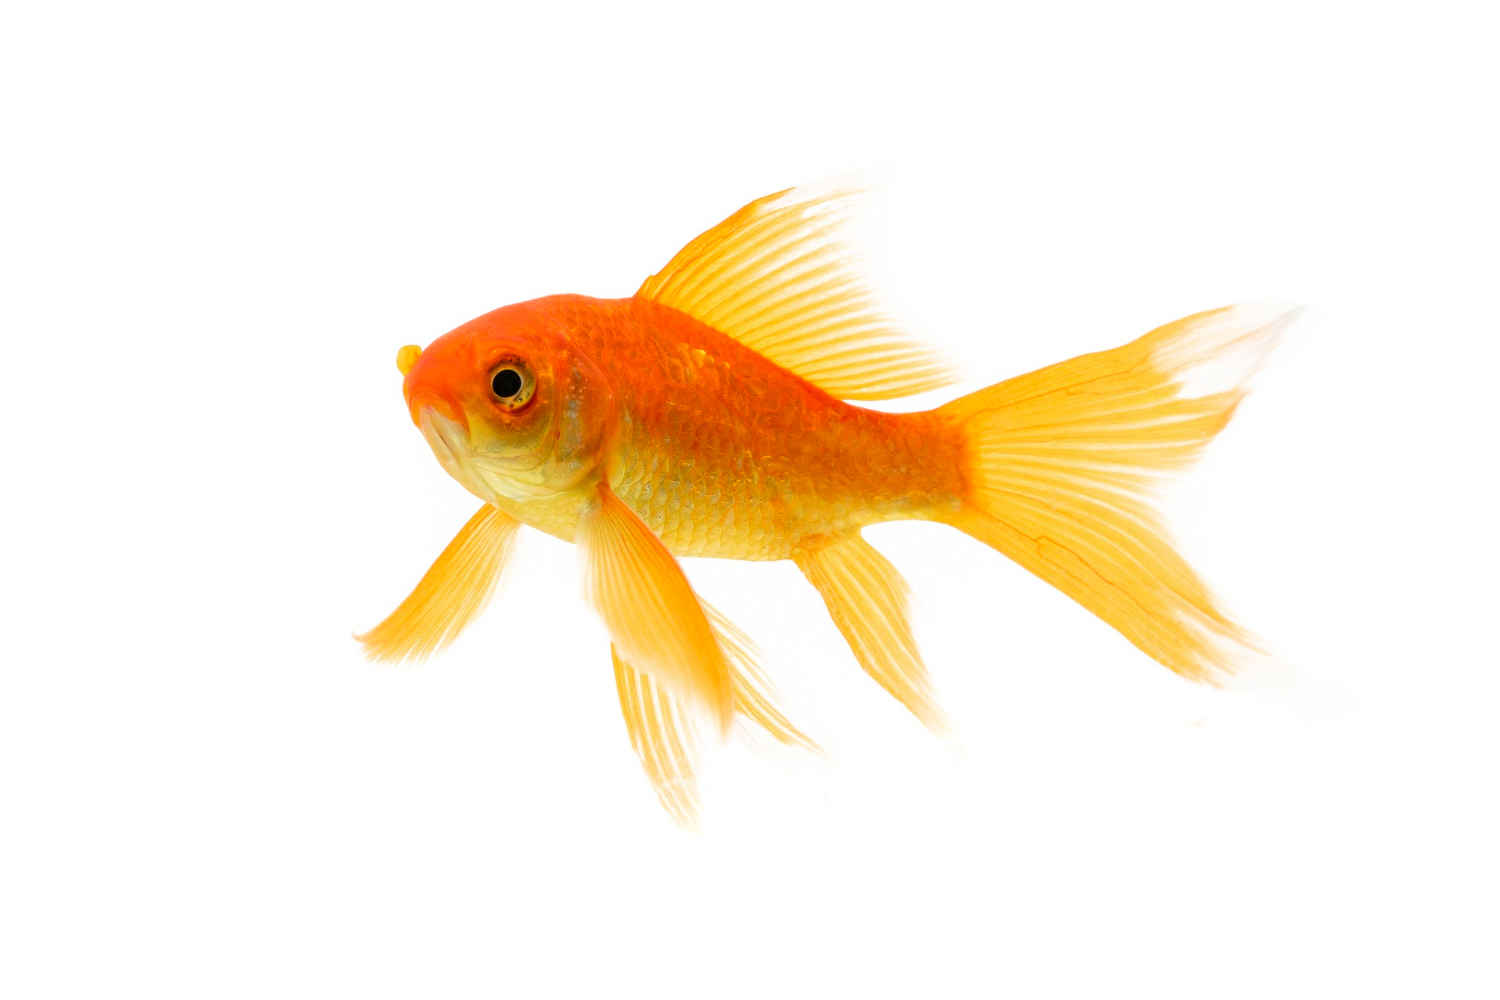 What is the best way to decorate a fish tank?